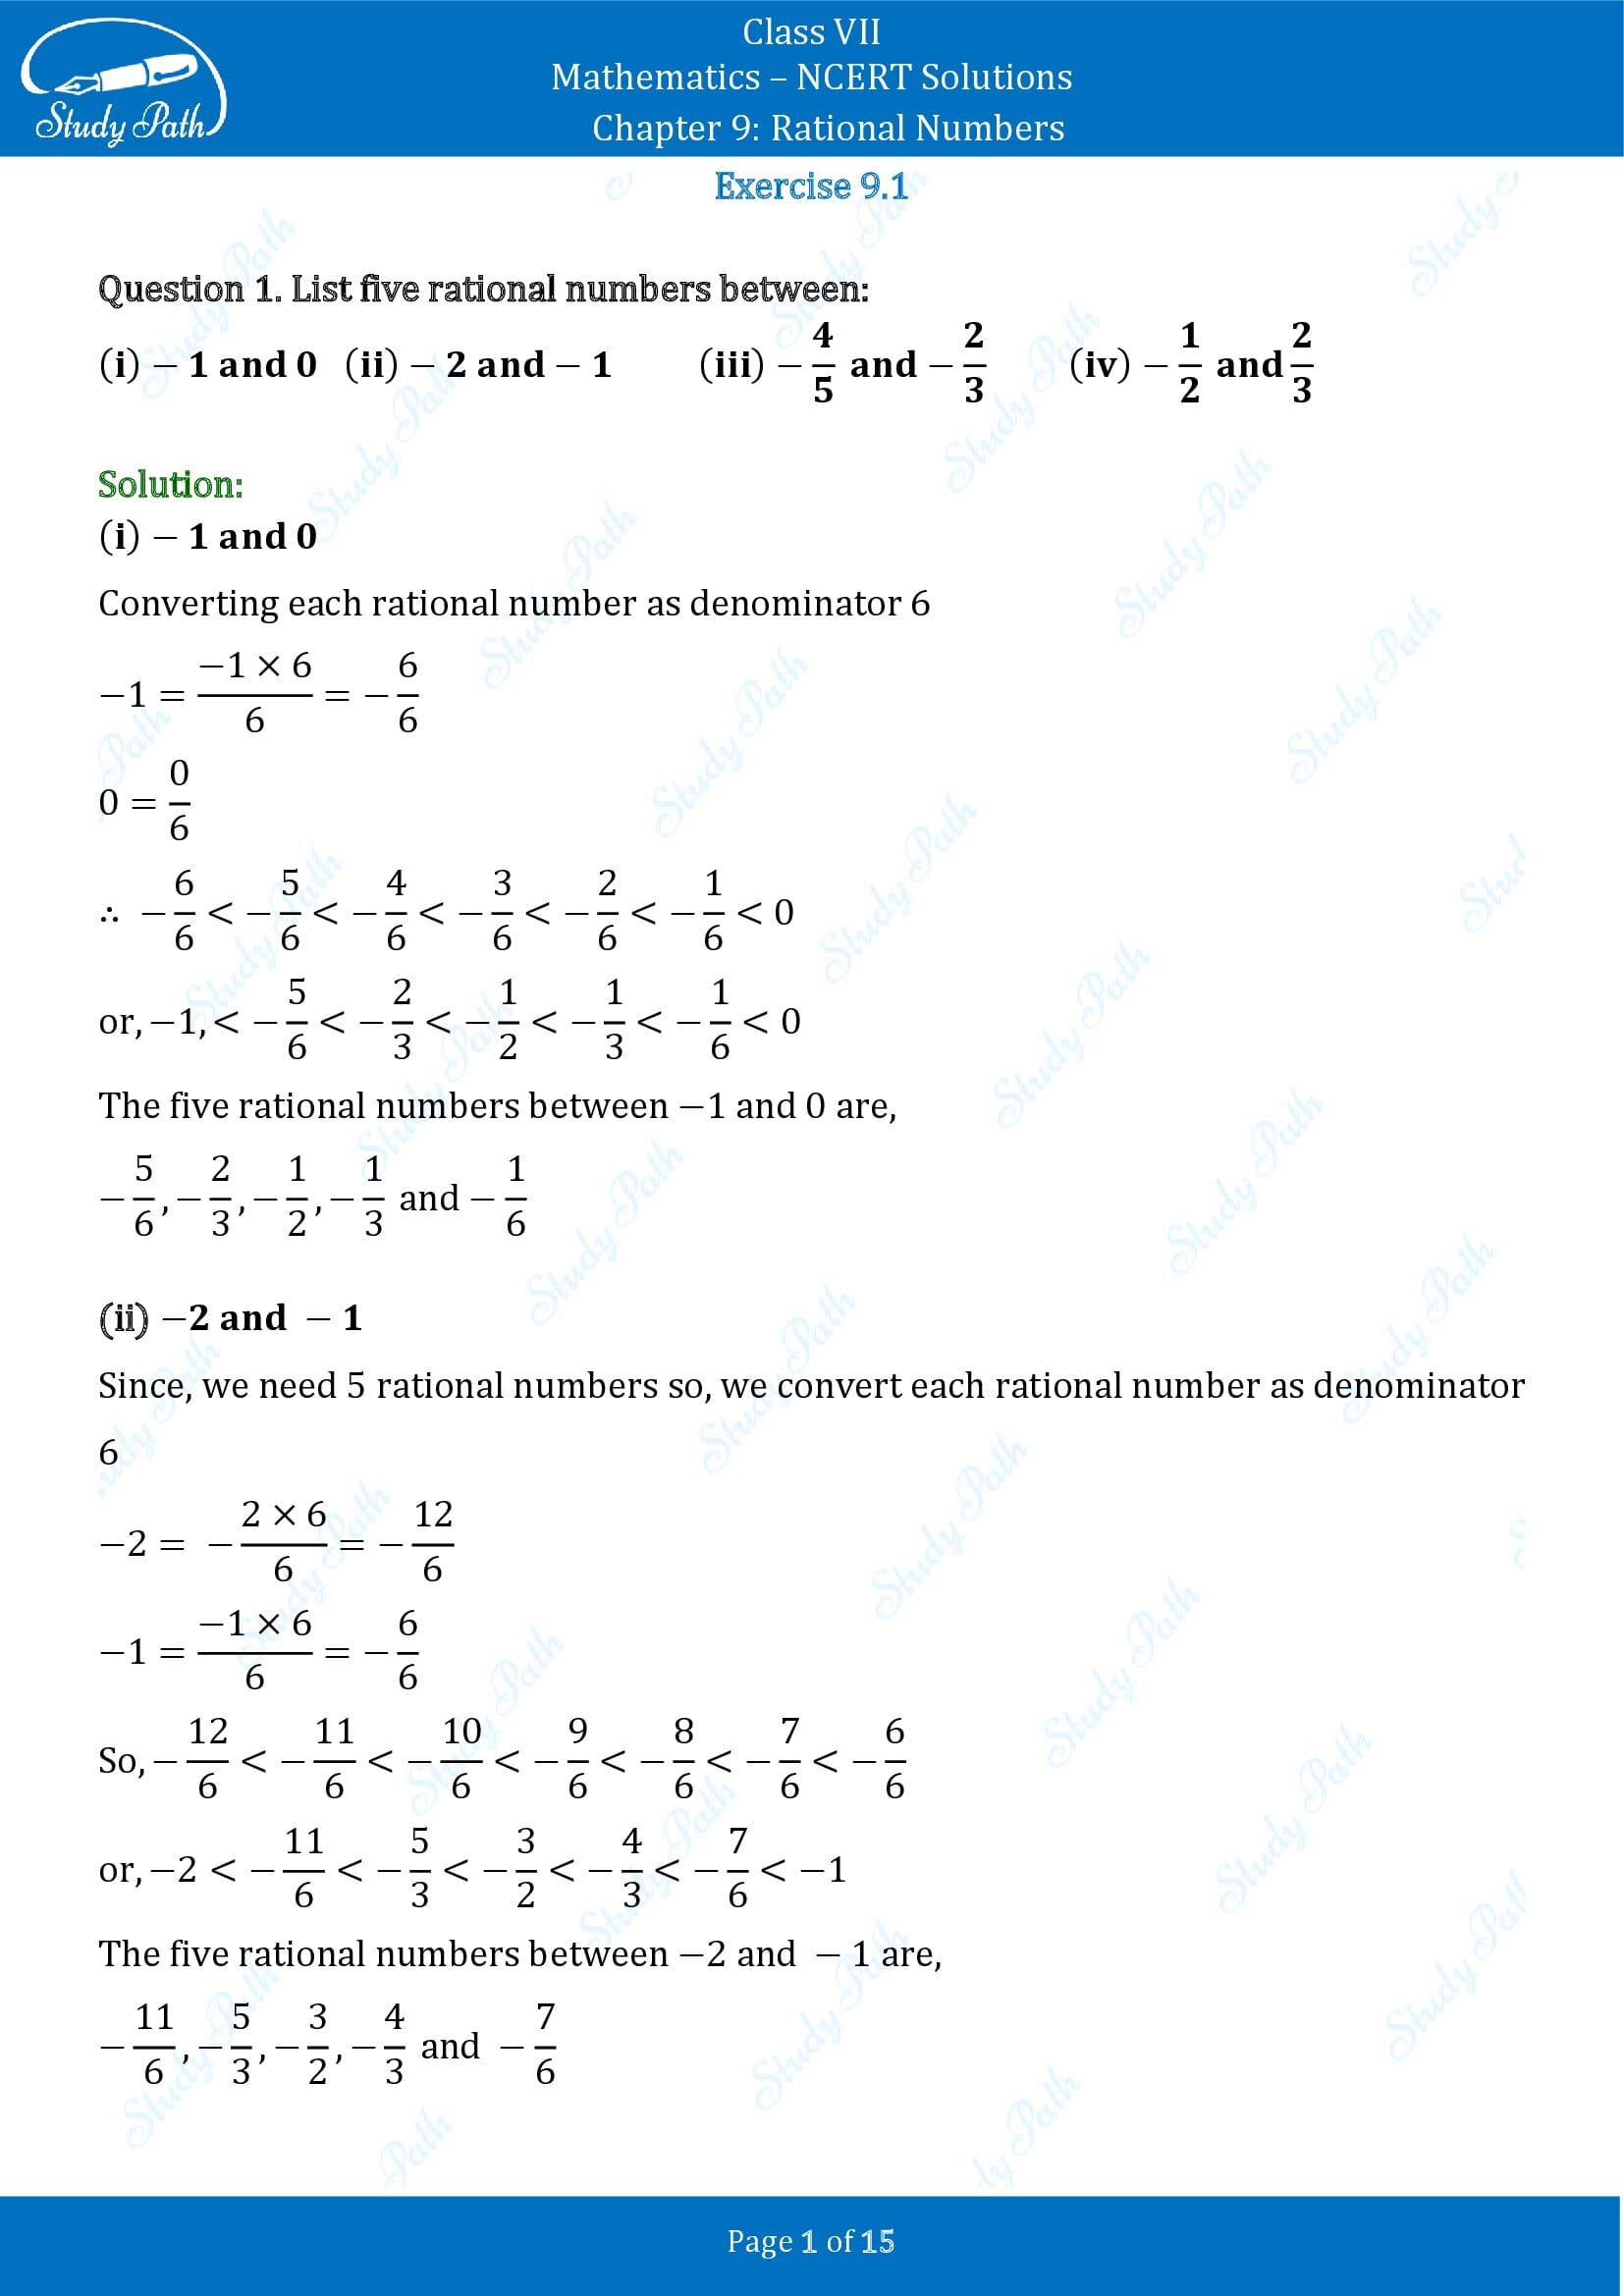 NCERT Solutions for Class 7 Maths Chapter 9 Rational Numbers Exercise 9.1 00001